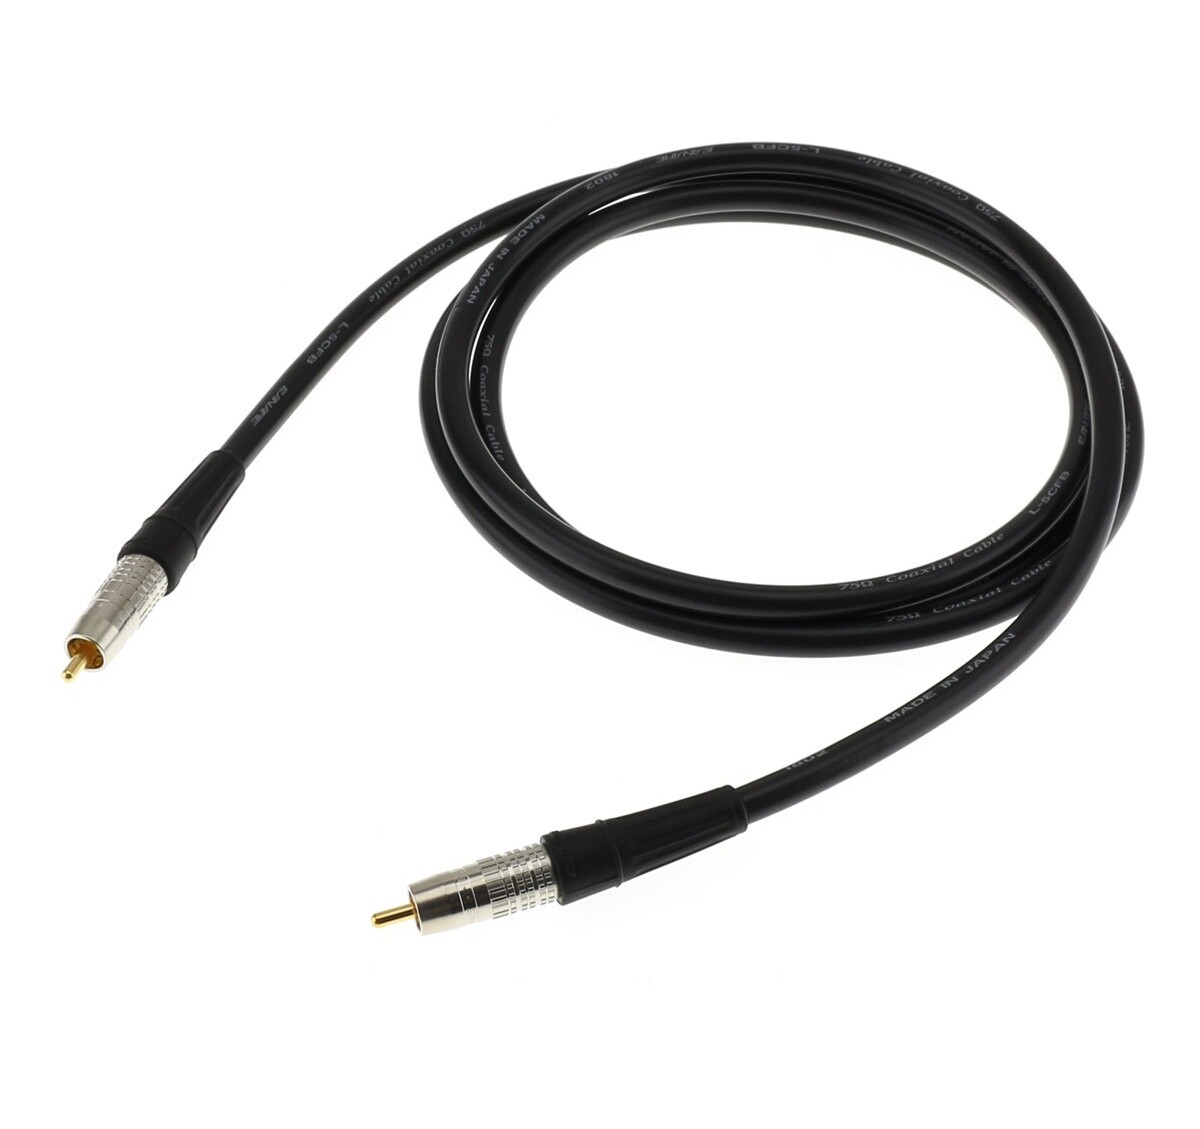 How Ohms Is RCA Audio Cable